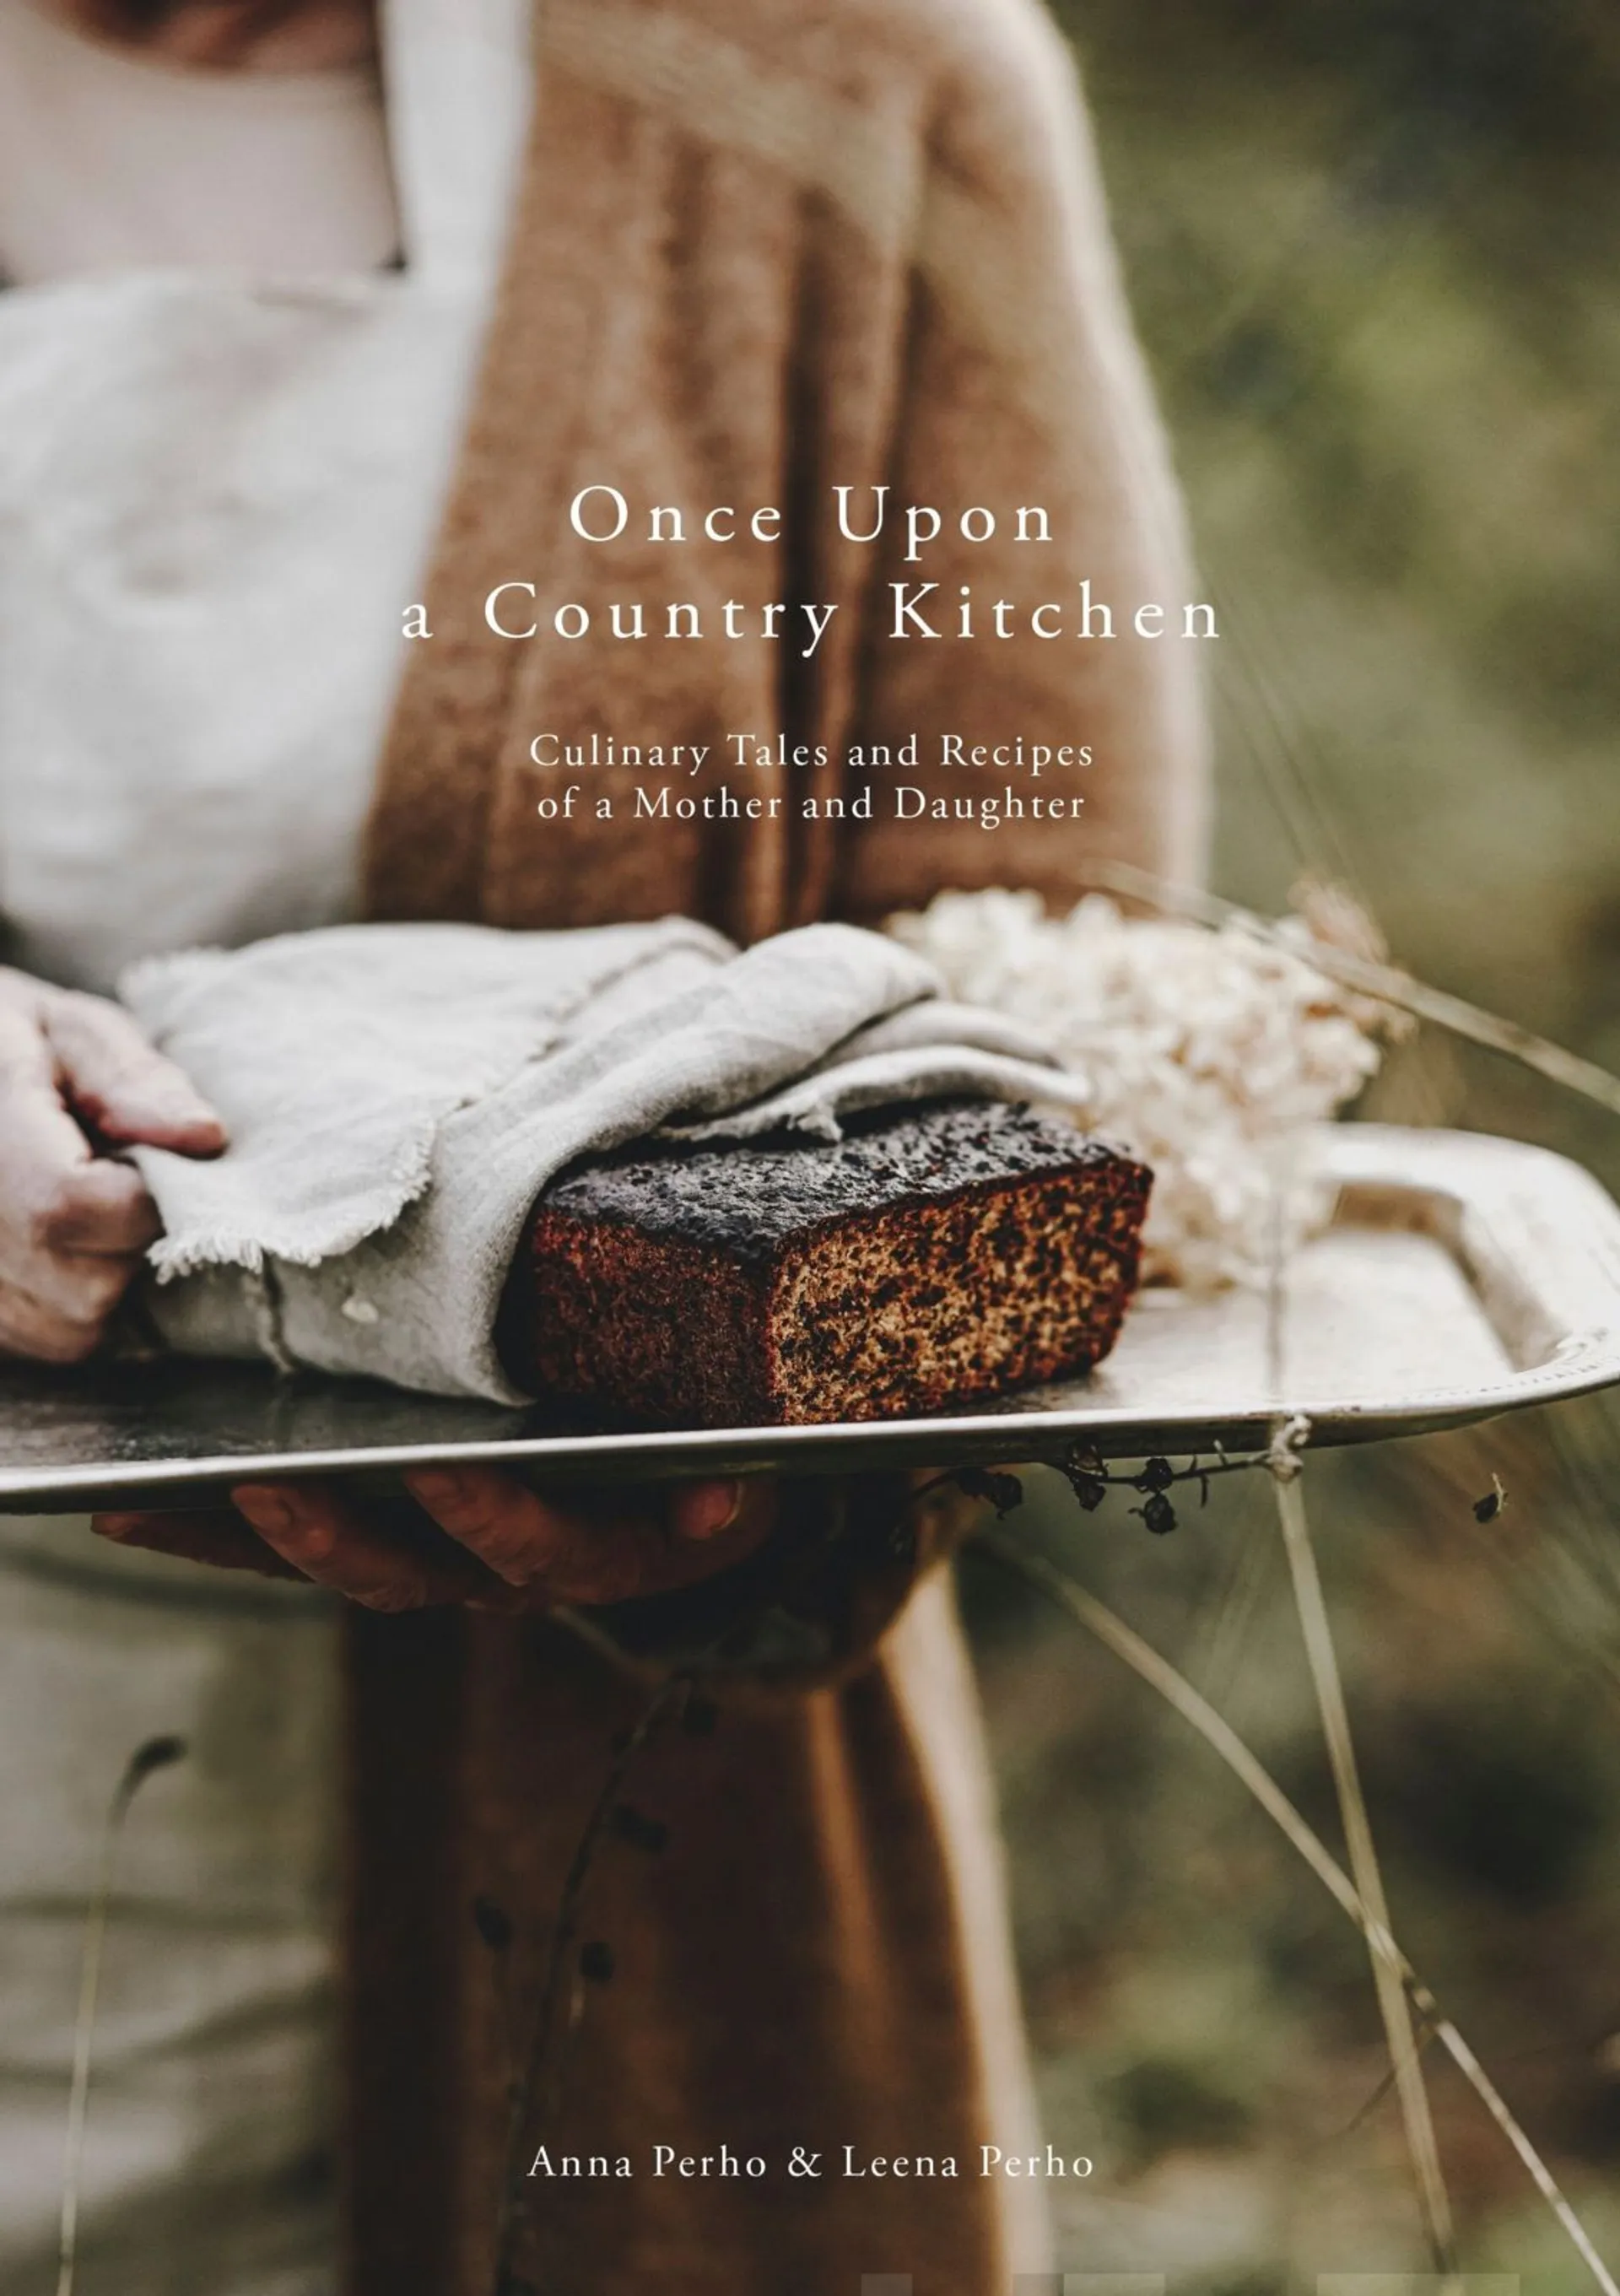 Once Upon a Country Kitchen, Culinary Tales and Recipesof a Mother and Daughter - ruokakirja